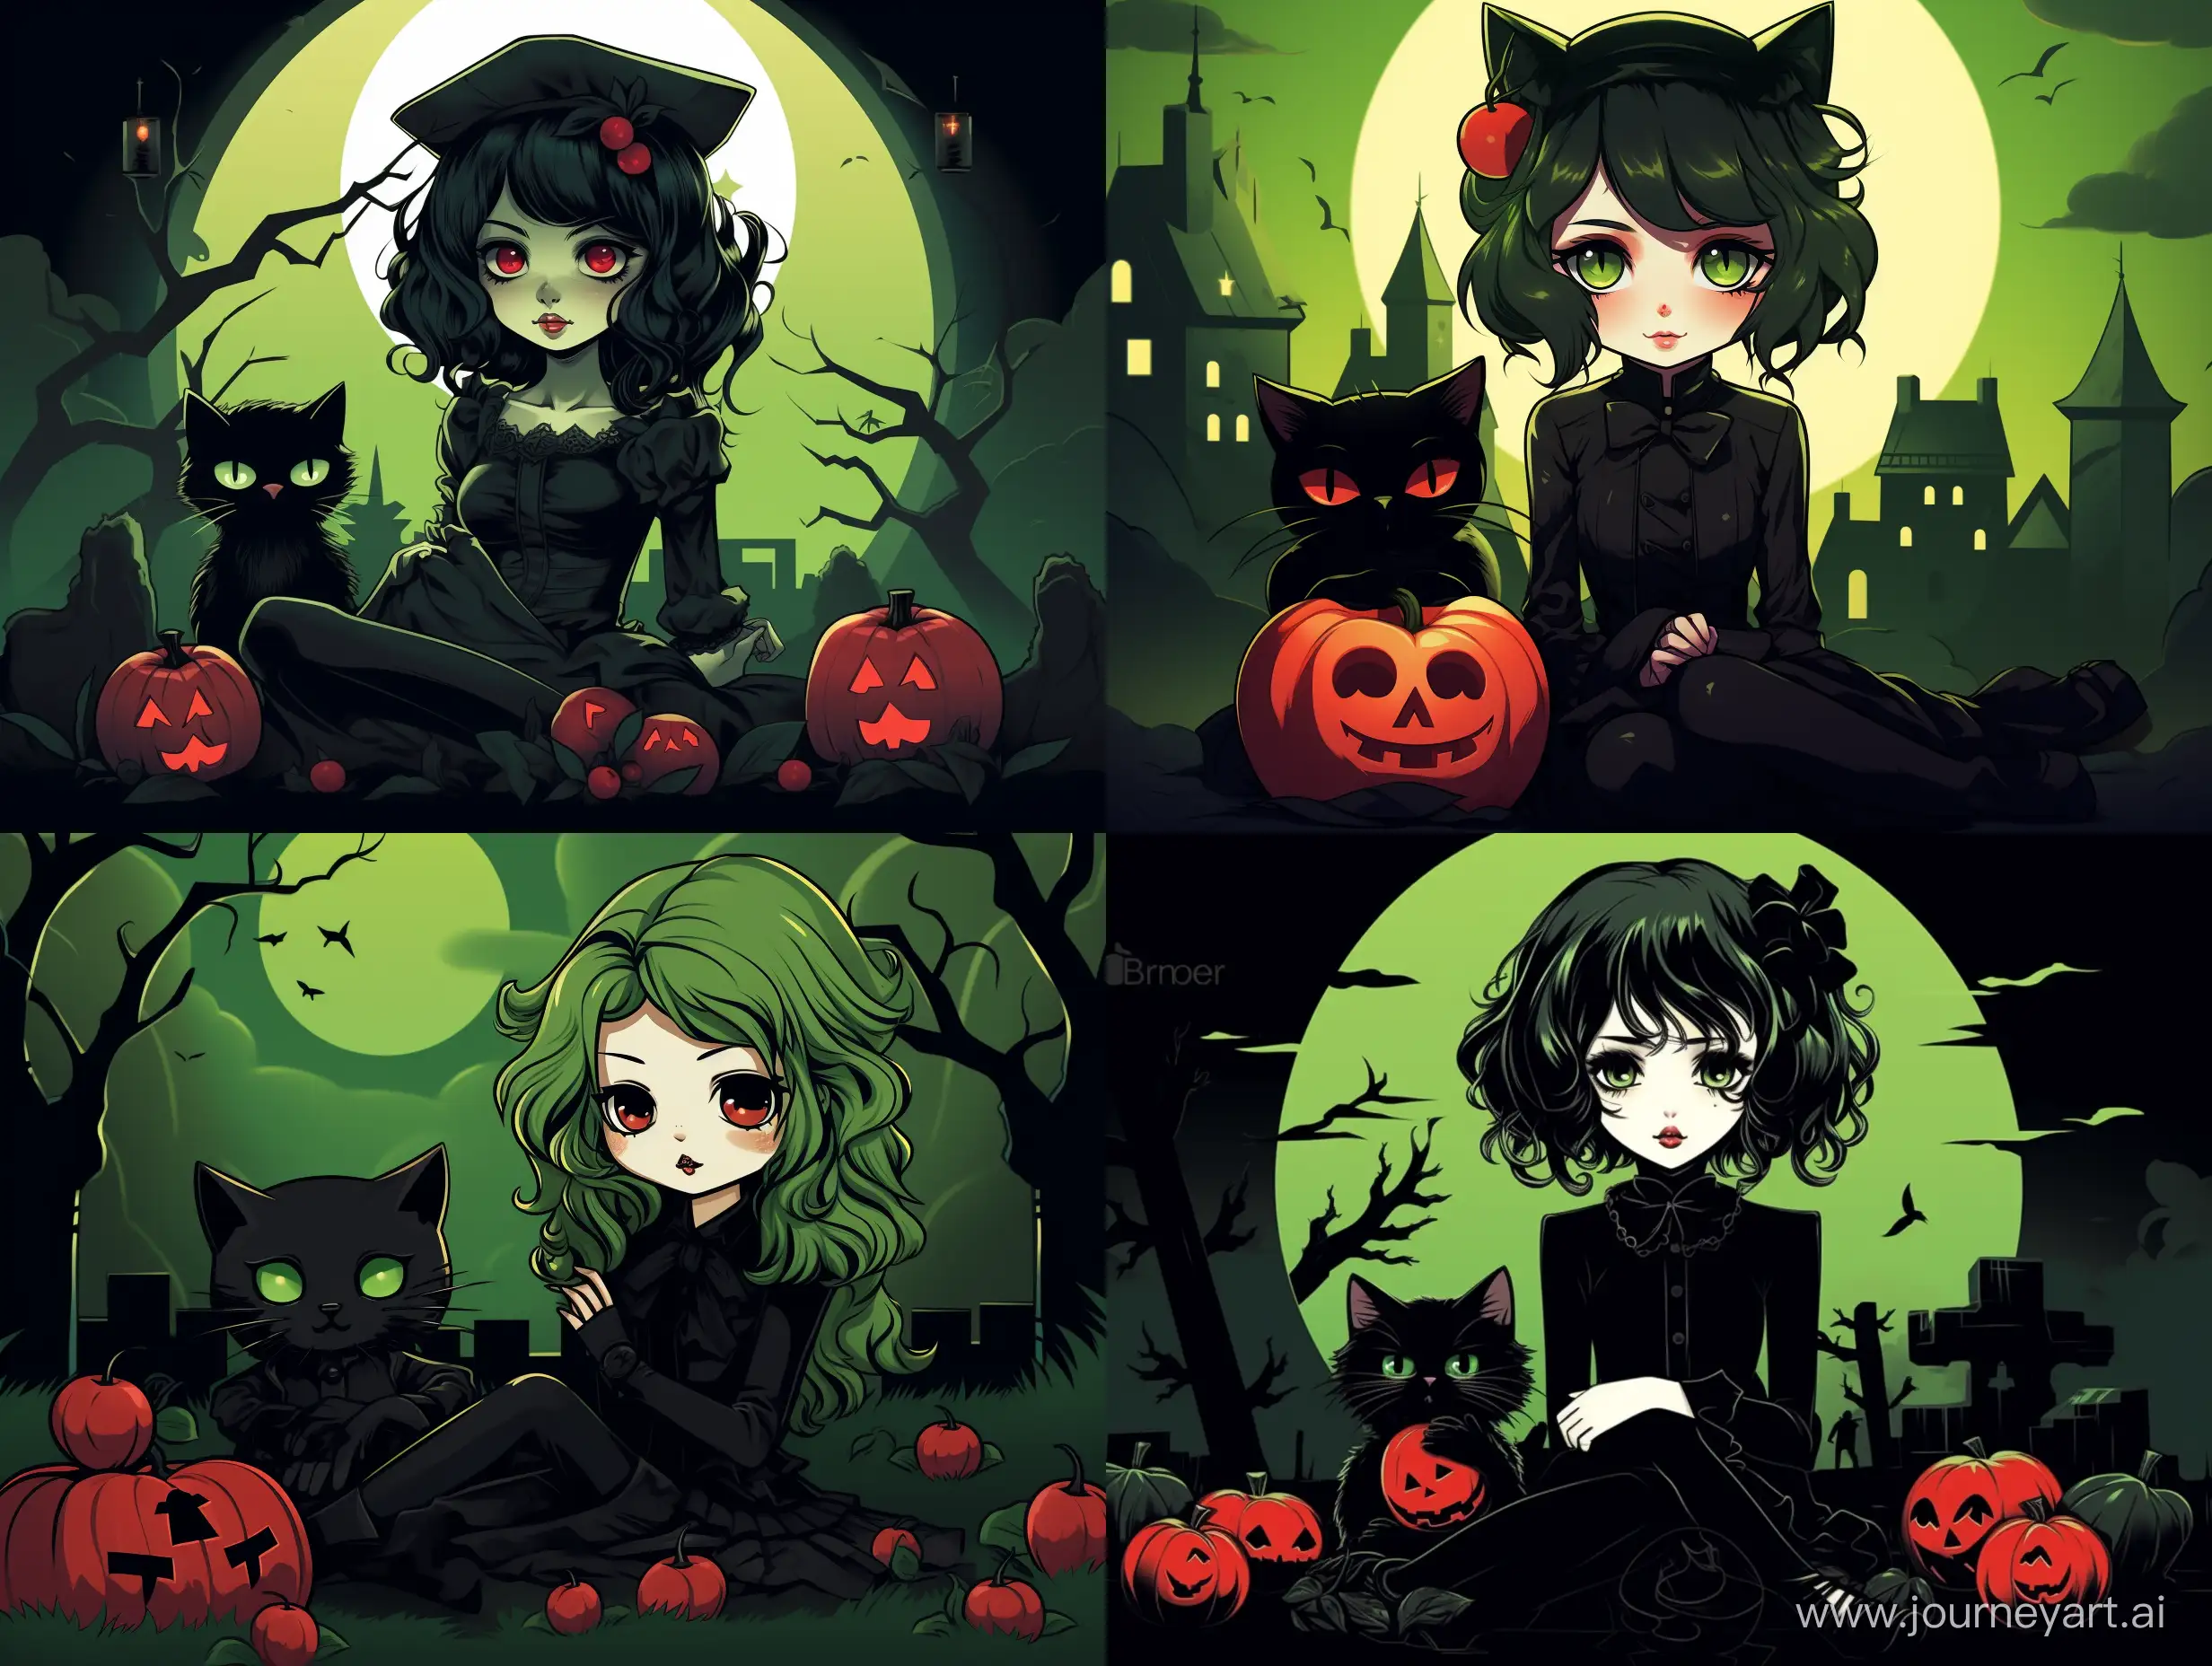 cute anime witch girl with a sad face and red cheeks and lips holding a green apple in a graveyard with a black cat on her lap in illustrative style